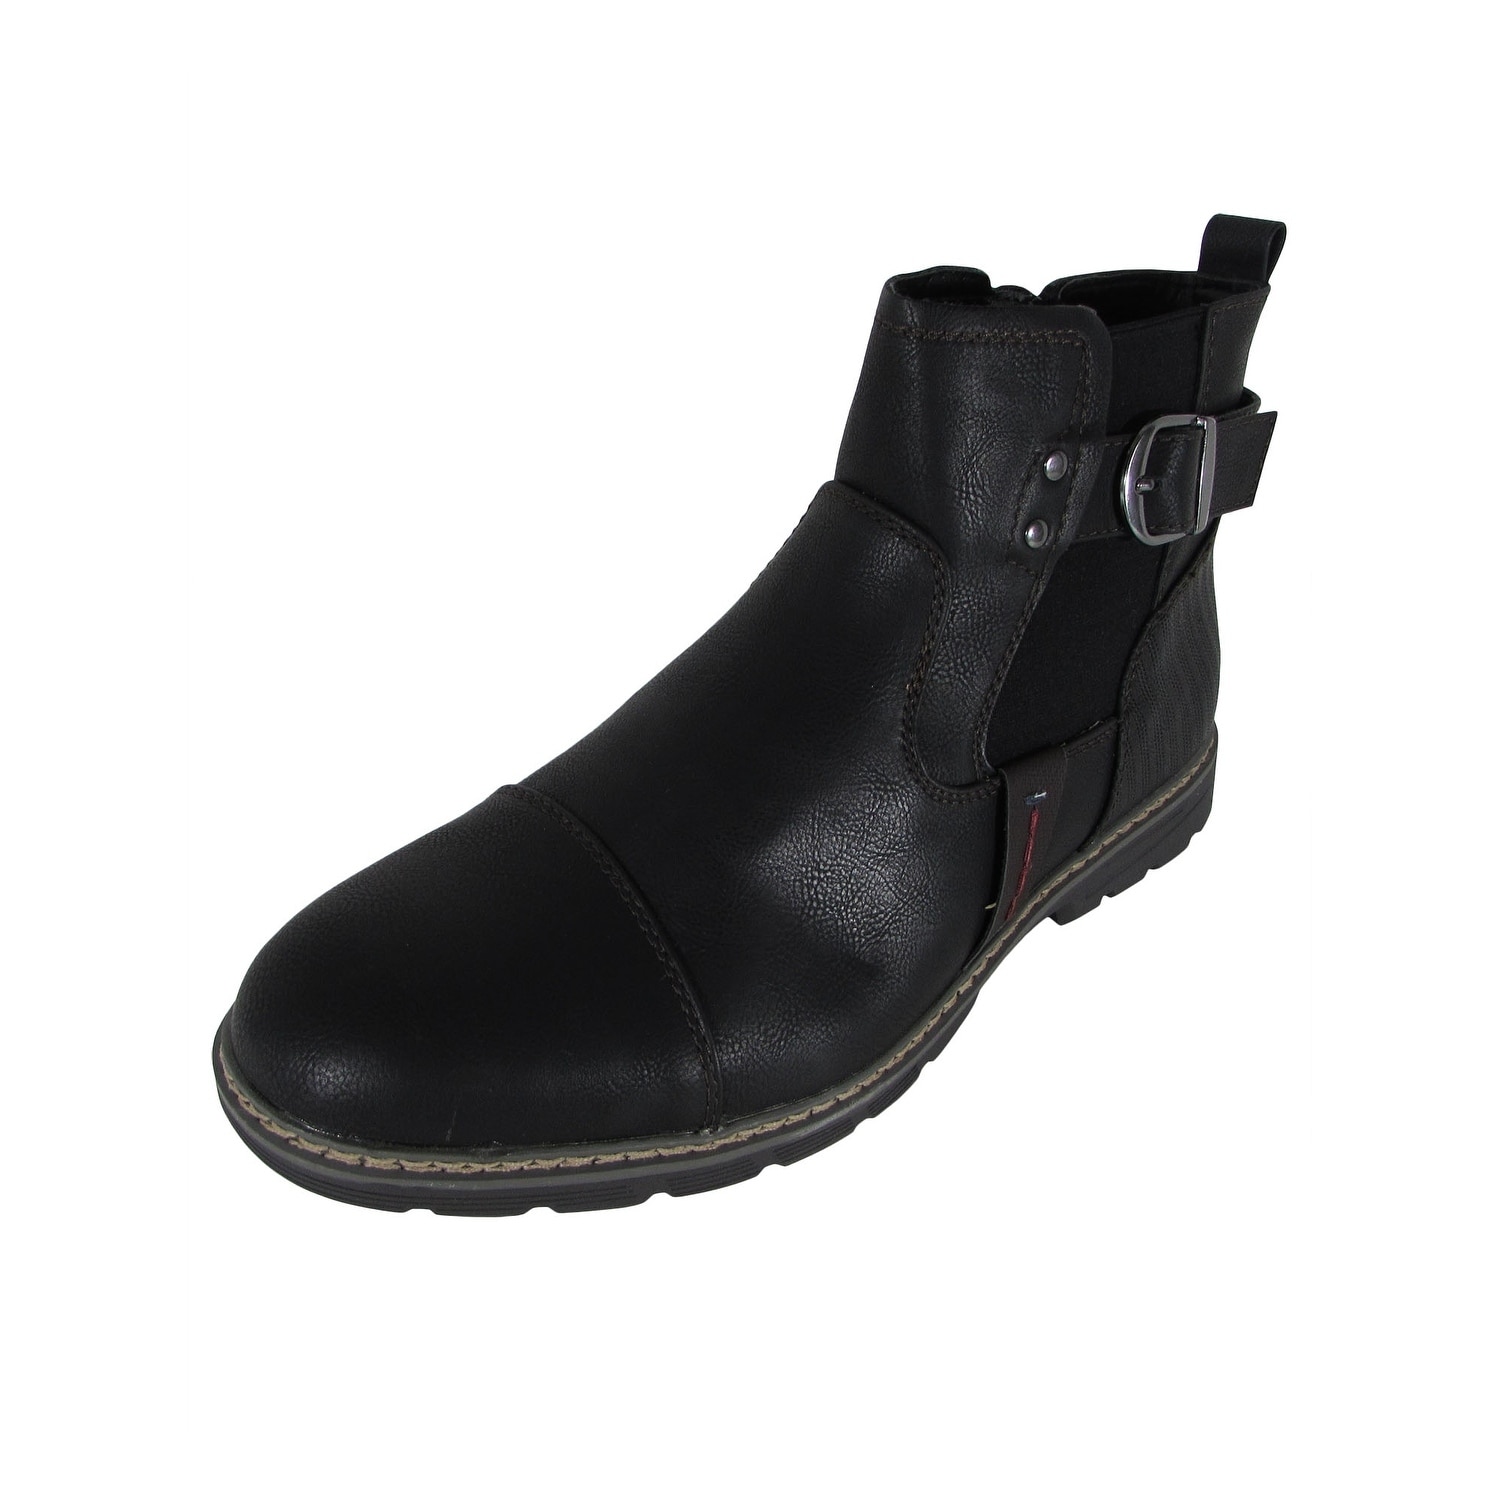 Day Five Mens Casual Zip Up Chelsea Boot Shoes, Black, US 10 - image 1 of 4